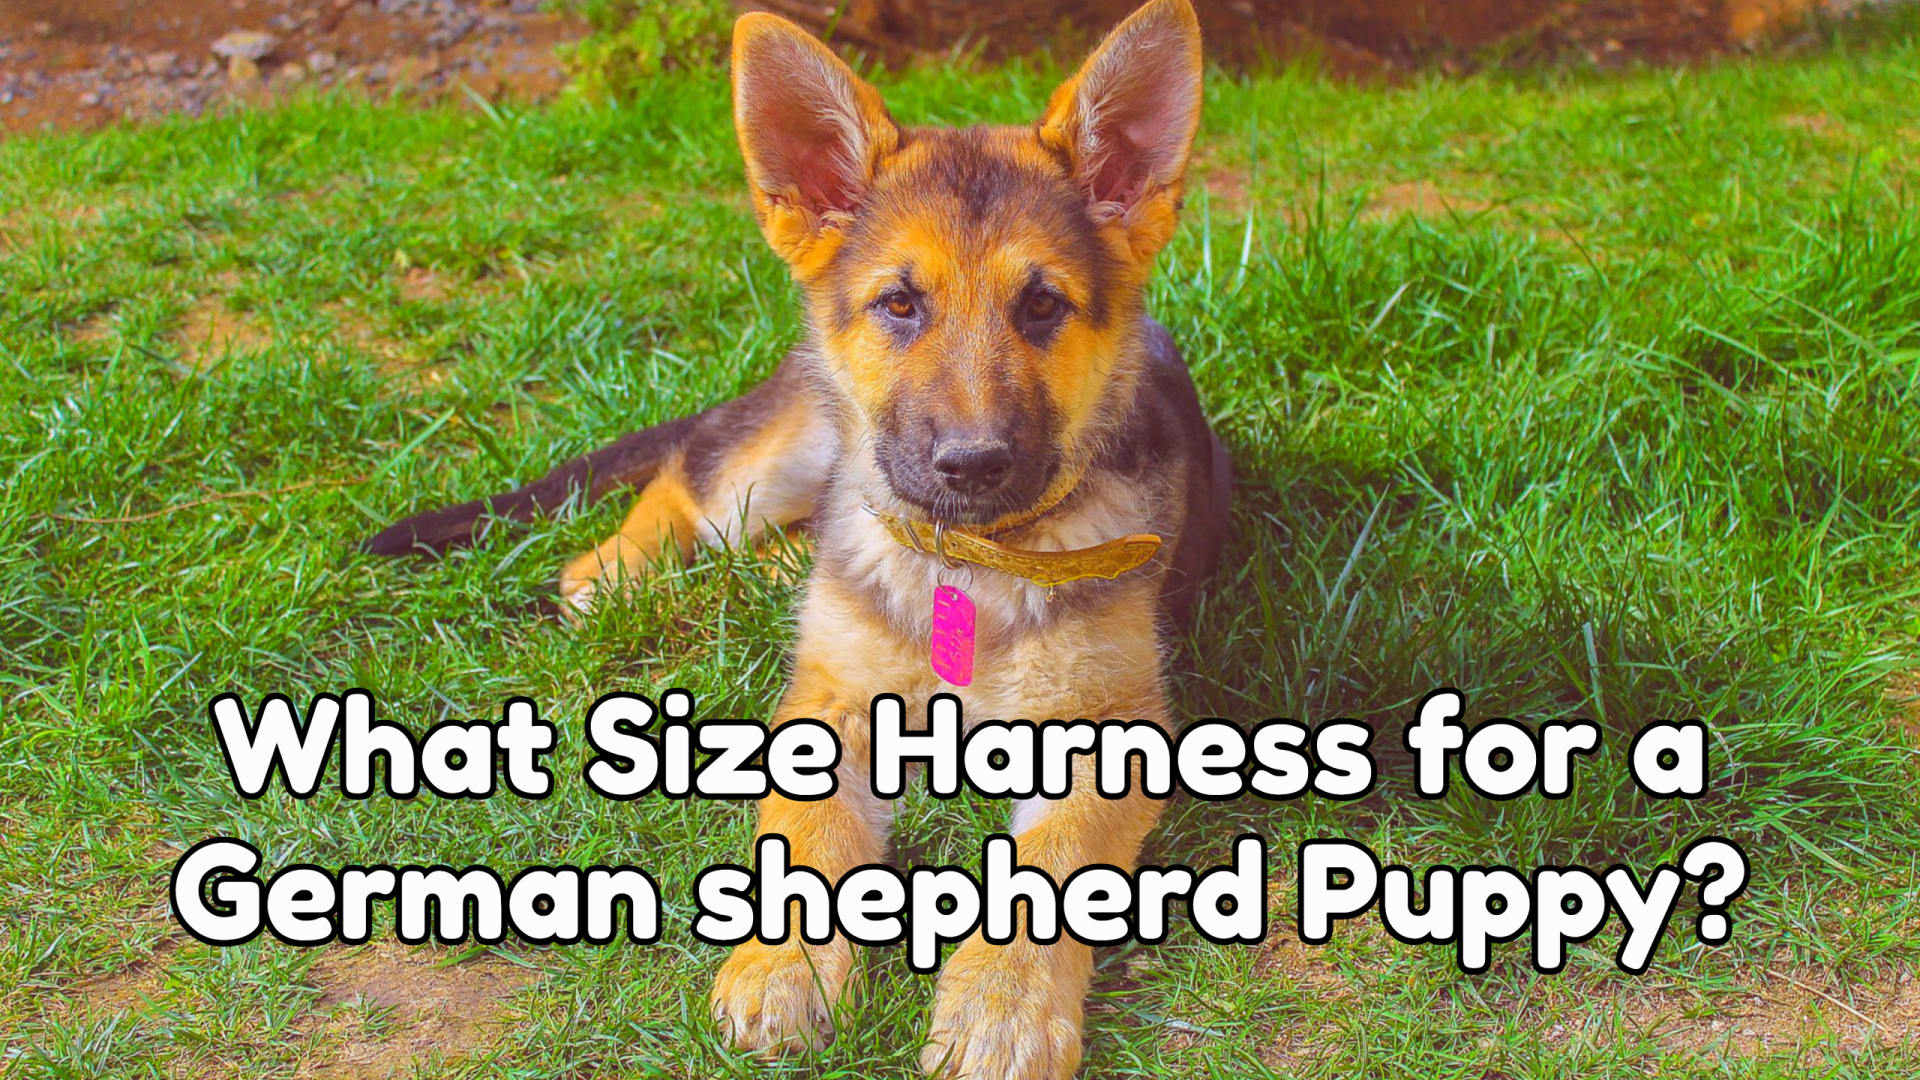 What Size Harness for a German shepherd Puppy